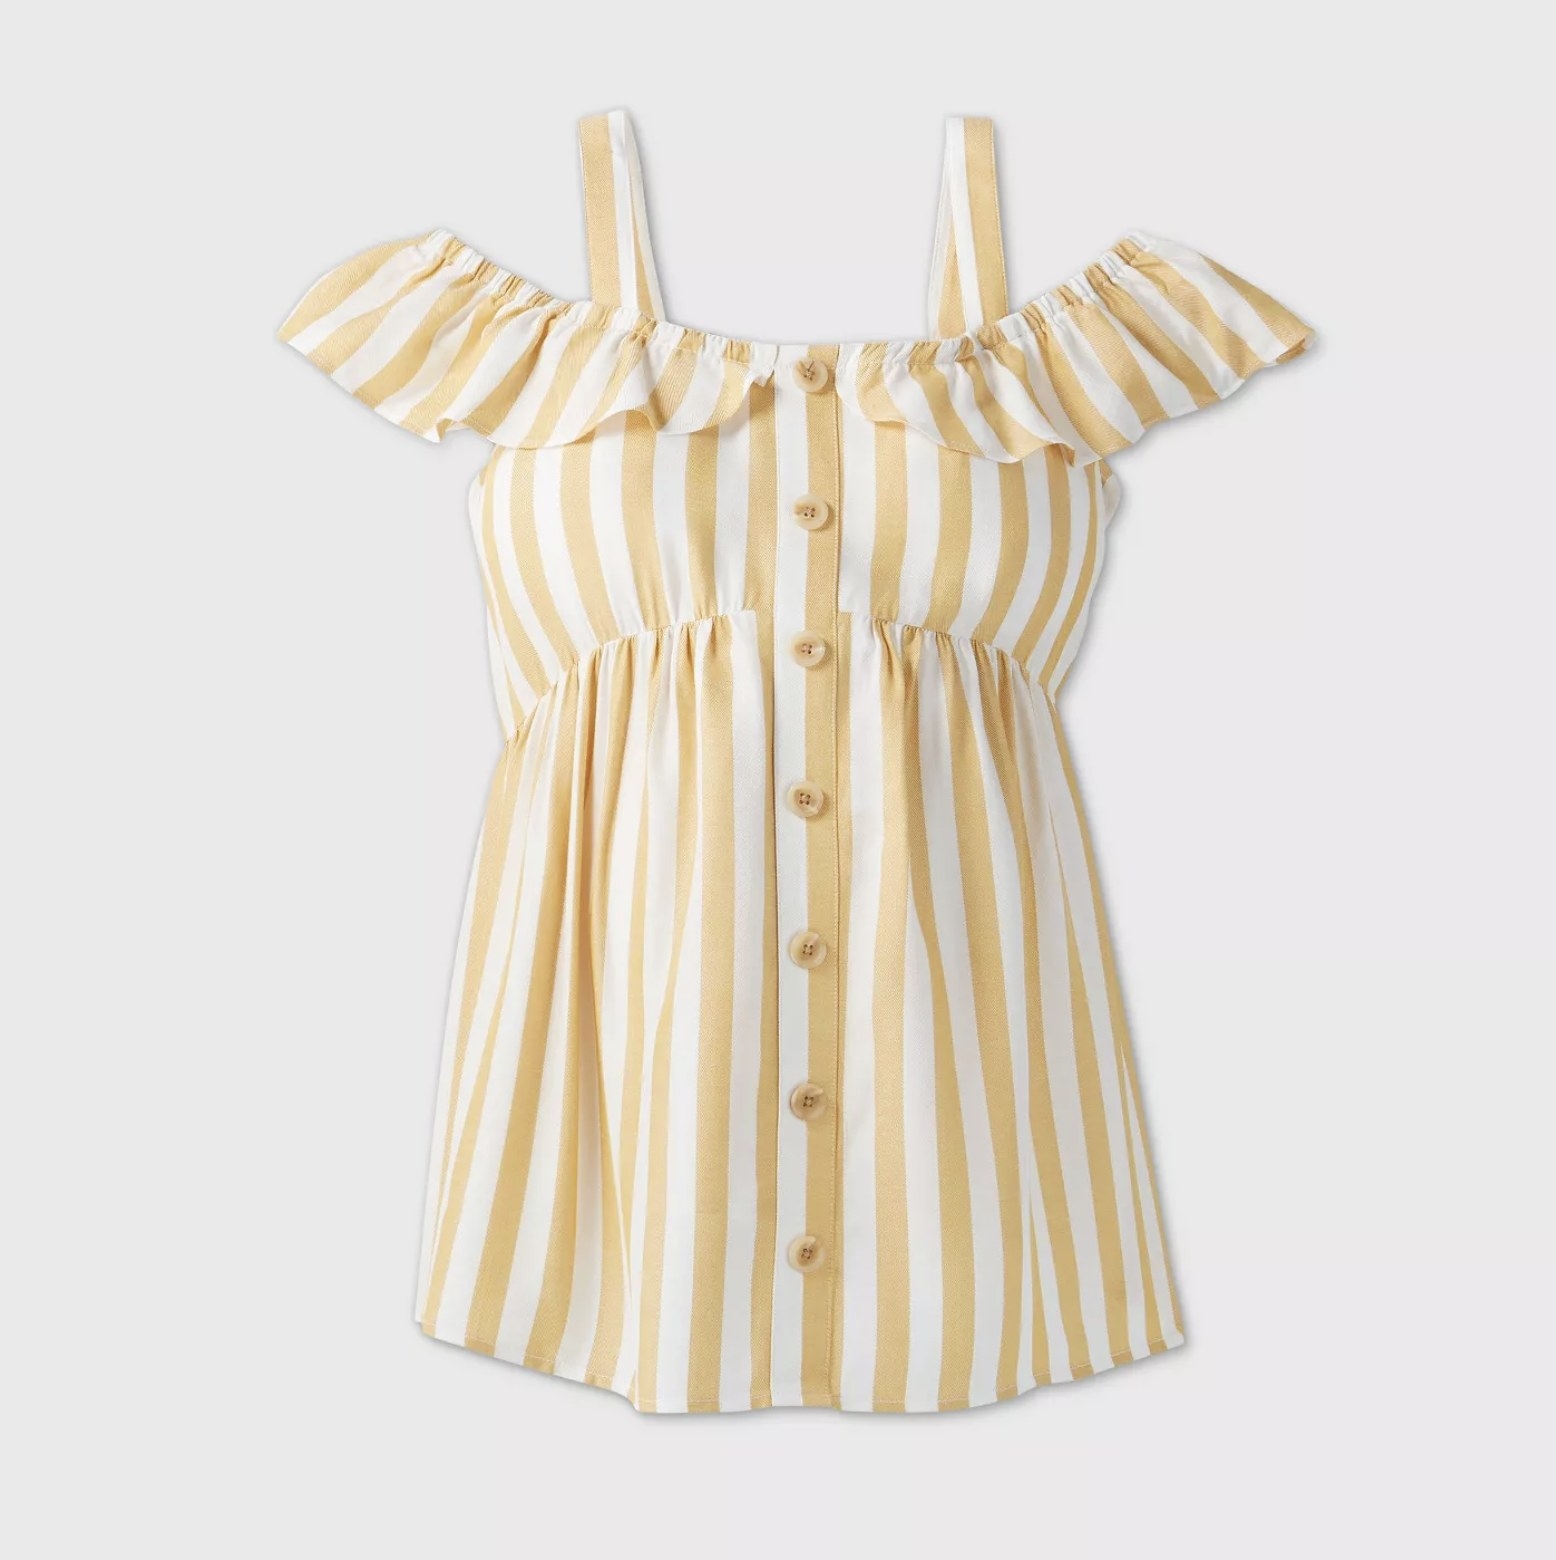 The white and yellow vertically striped off-the-shoulder top with ruffled sleeves and thin shoulder straps with buttons down the front